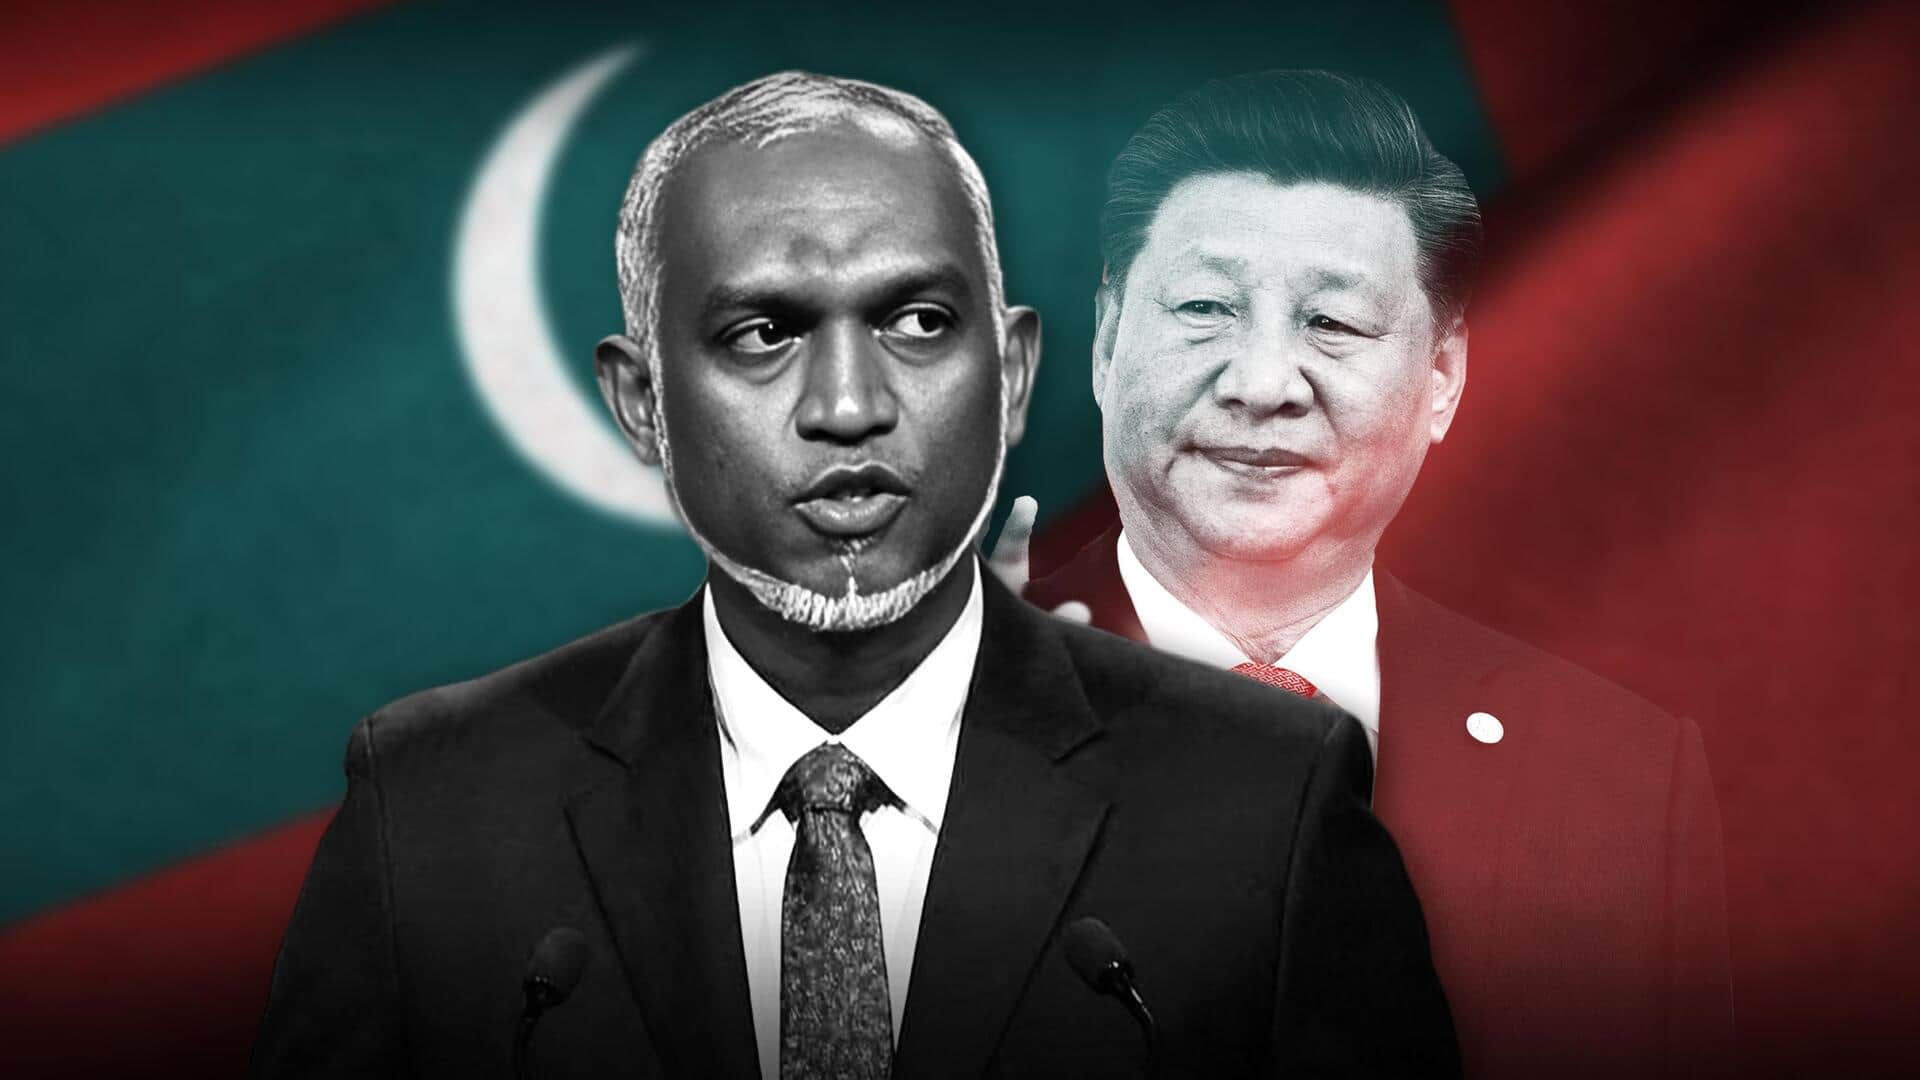 Stay open-minded: China on ties with Maldives amid India row